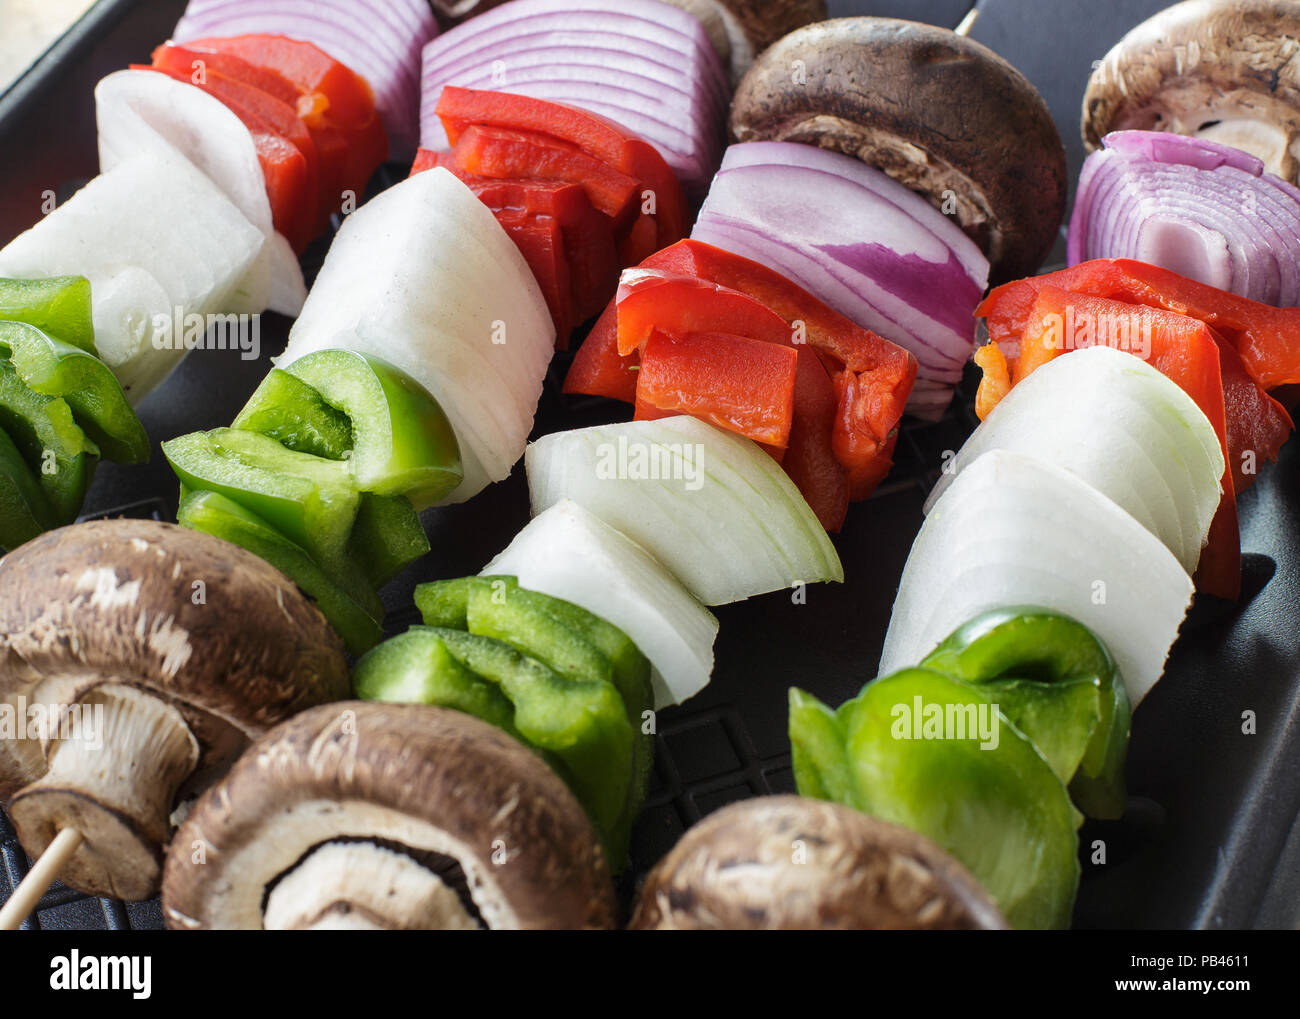 Page 3 - Potluck Food High Resolution Stock Photography and Images - Alamy